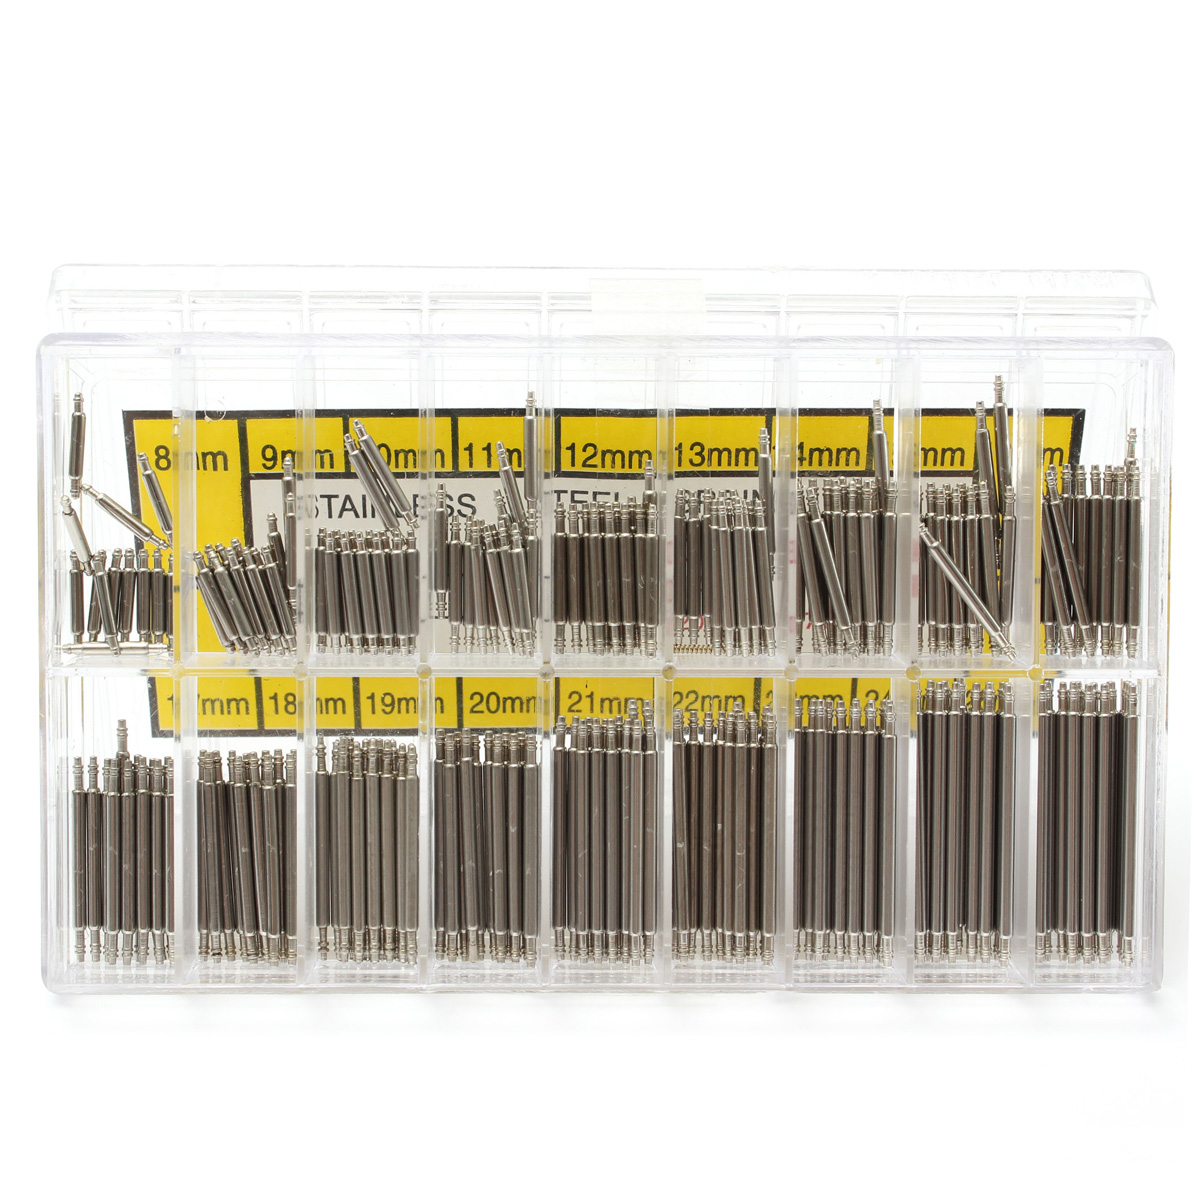 360pcs-8-25mm-Watch-Band-Strap-Link-Pin-Spring-Bars-Remover-Removal-Repair-Tools-1040142